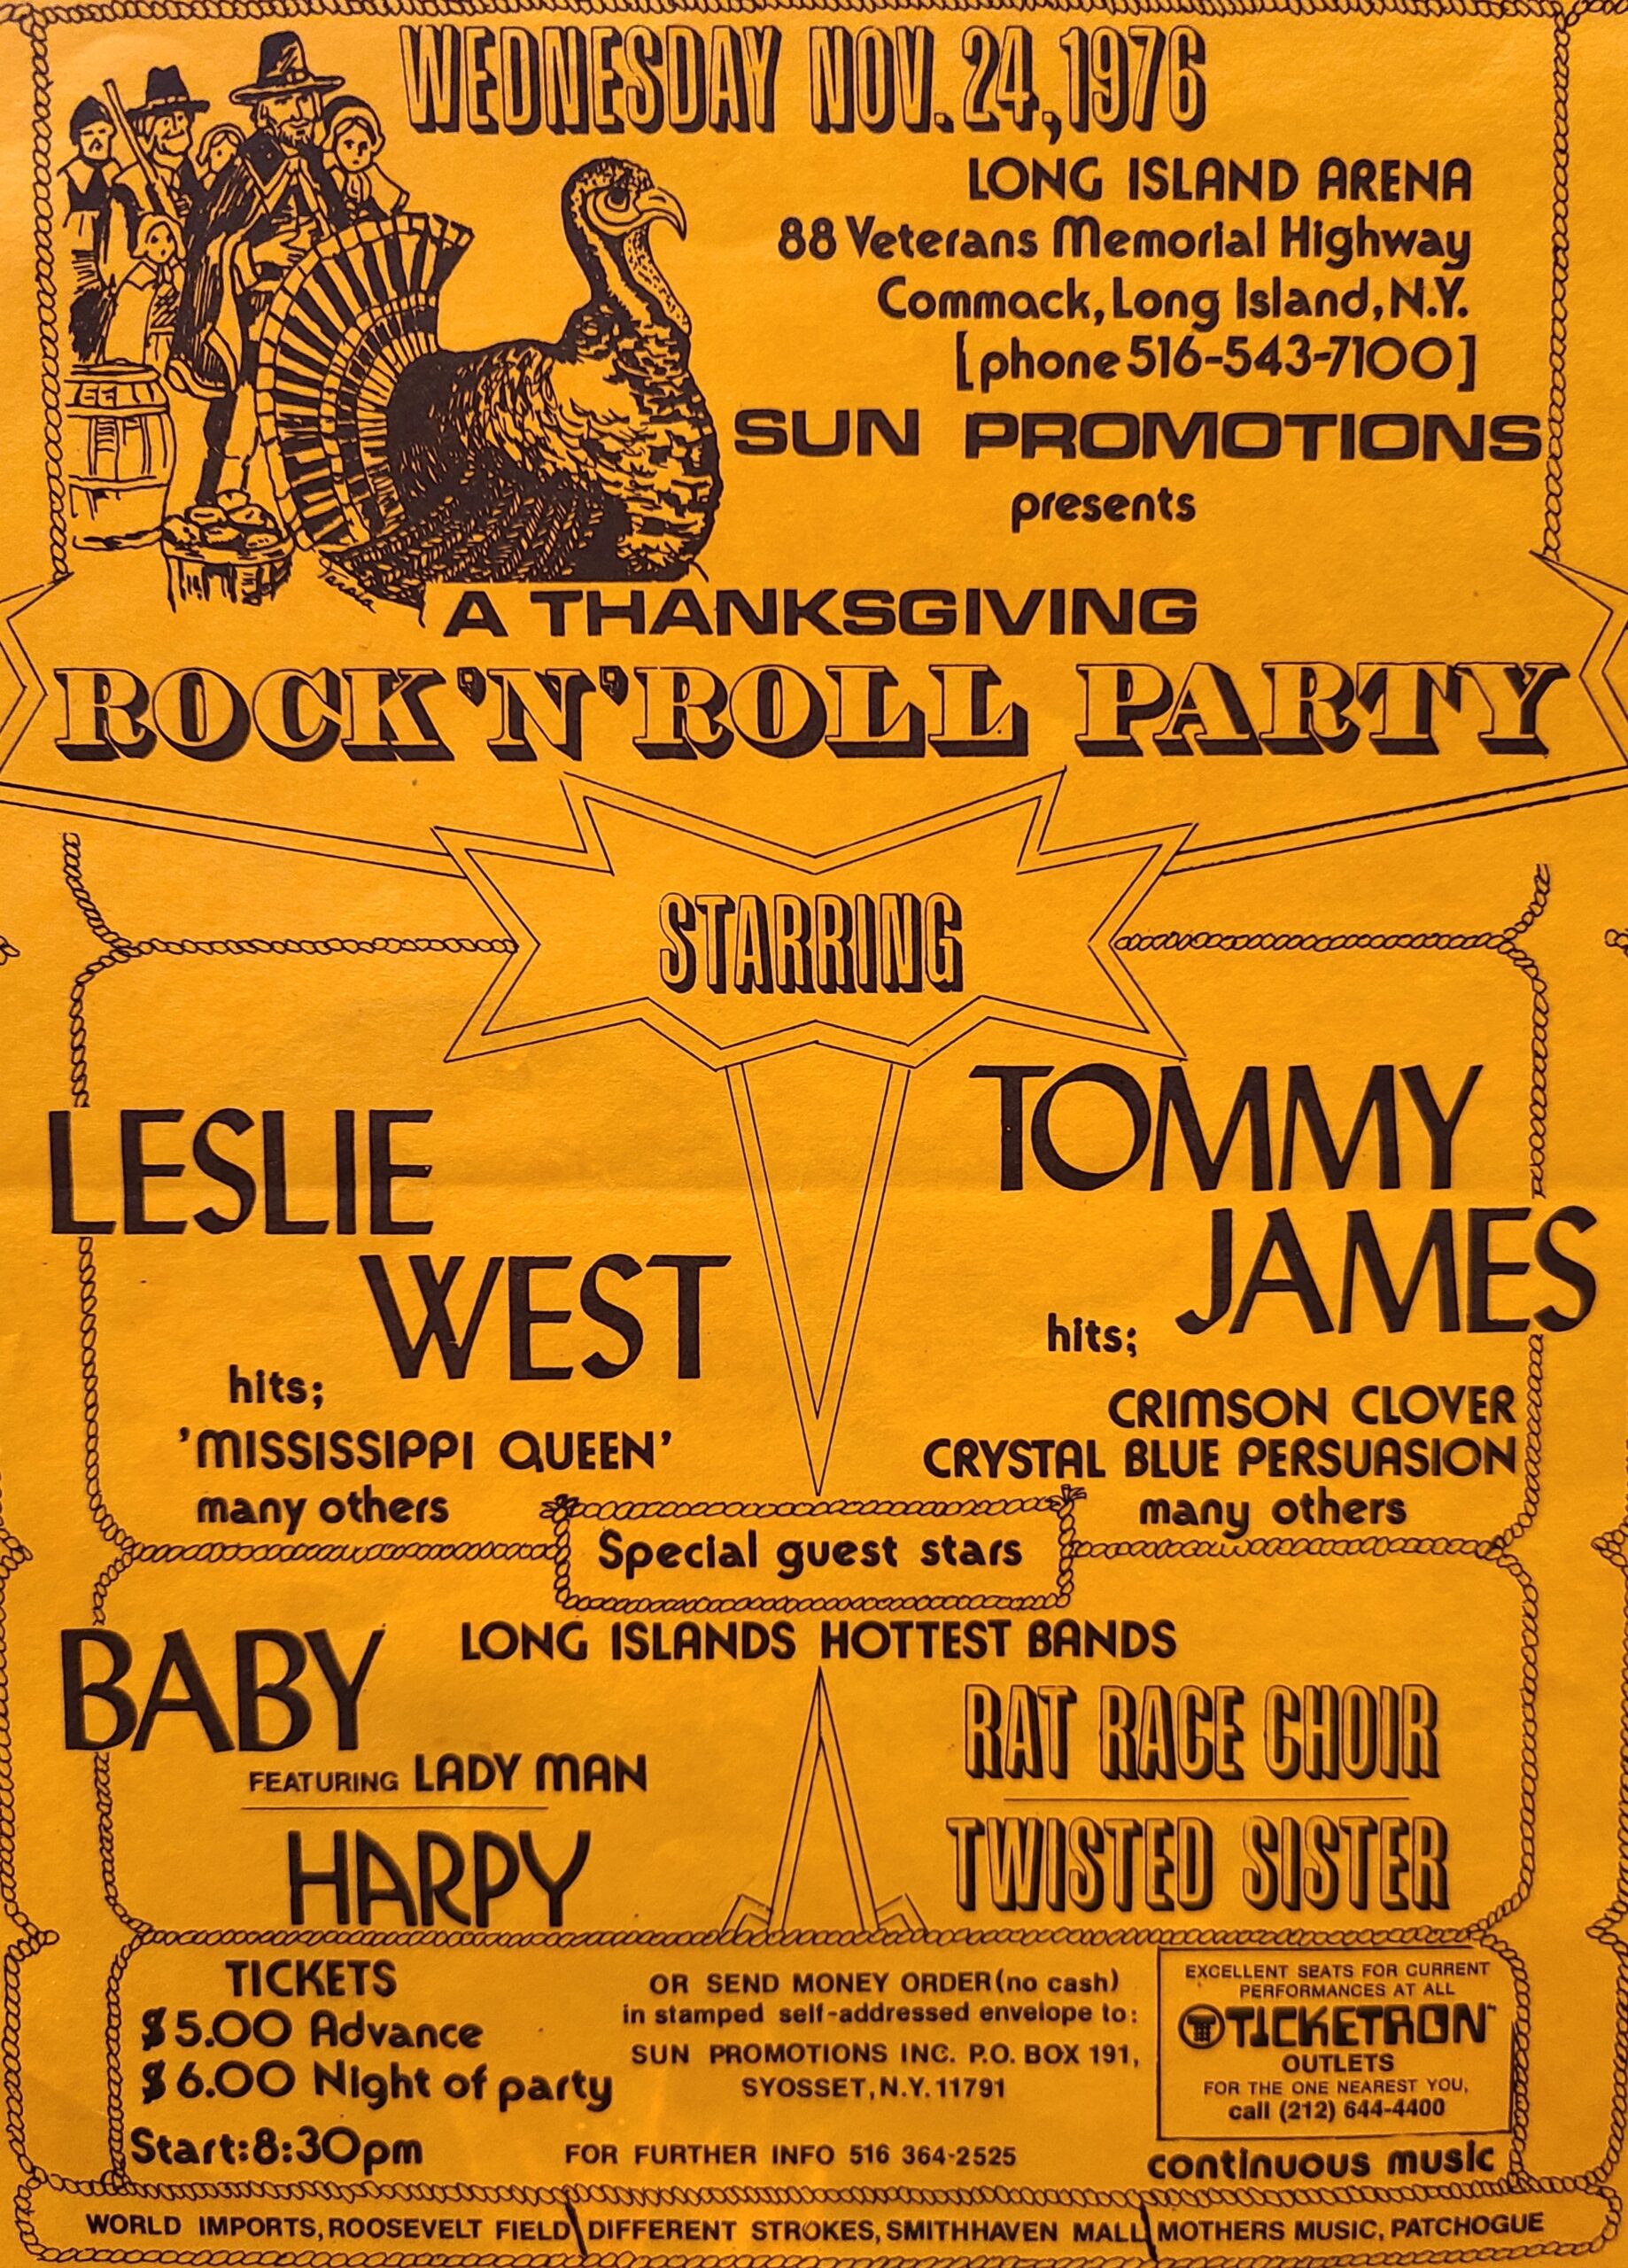 Concert poster for Leslie West, Twisted Sister and others at the Long Island Arena, November 24, 1976.